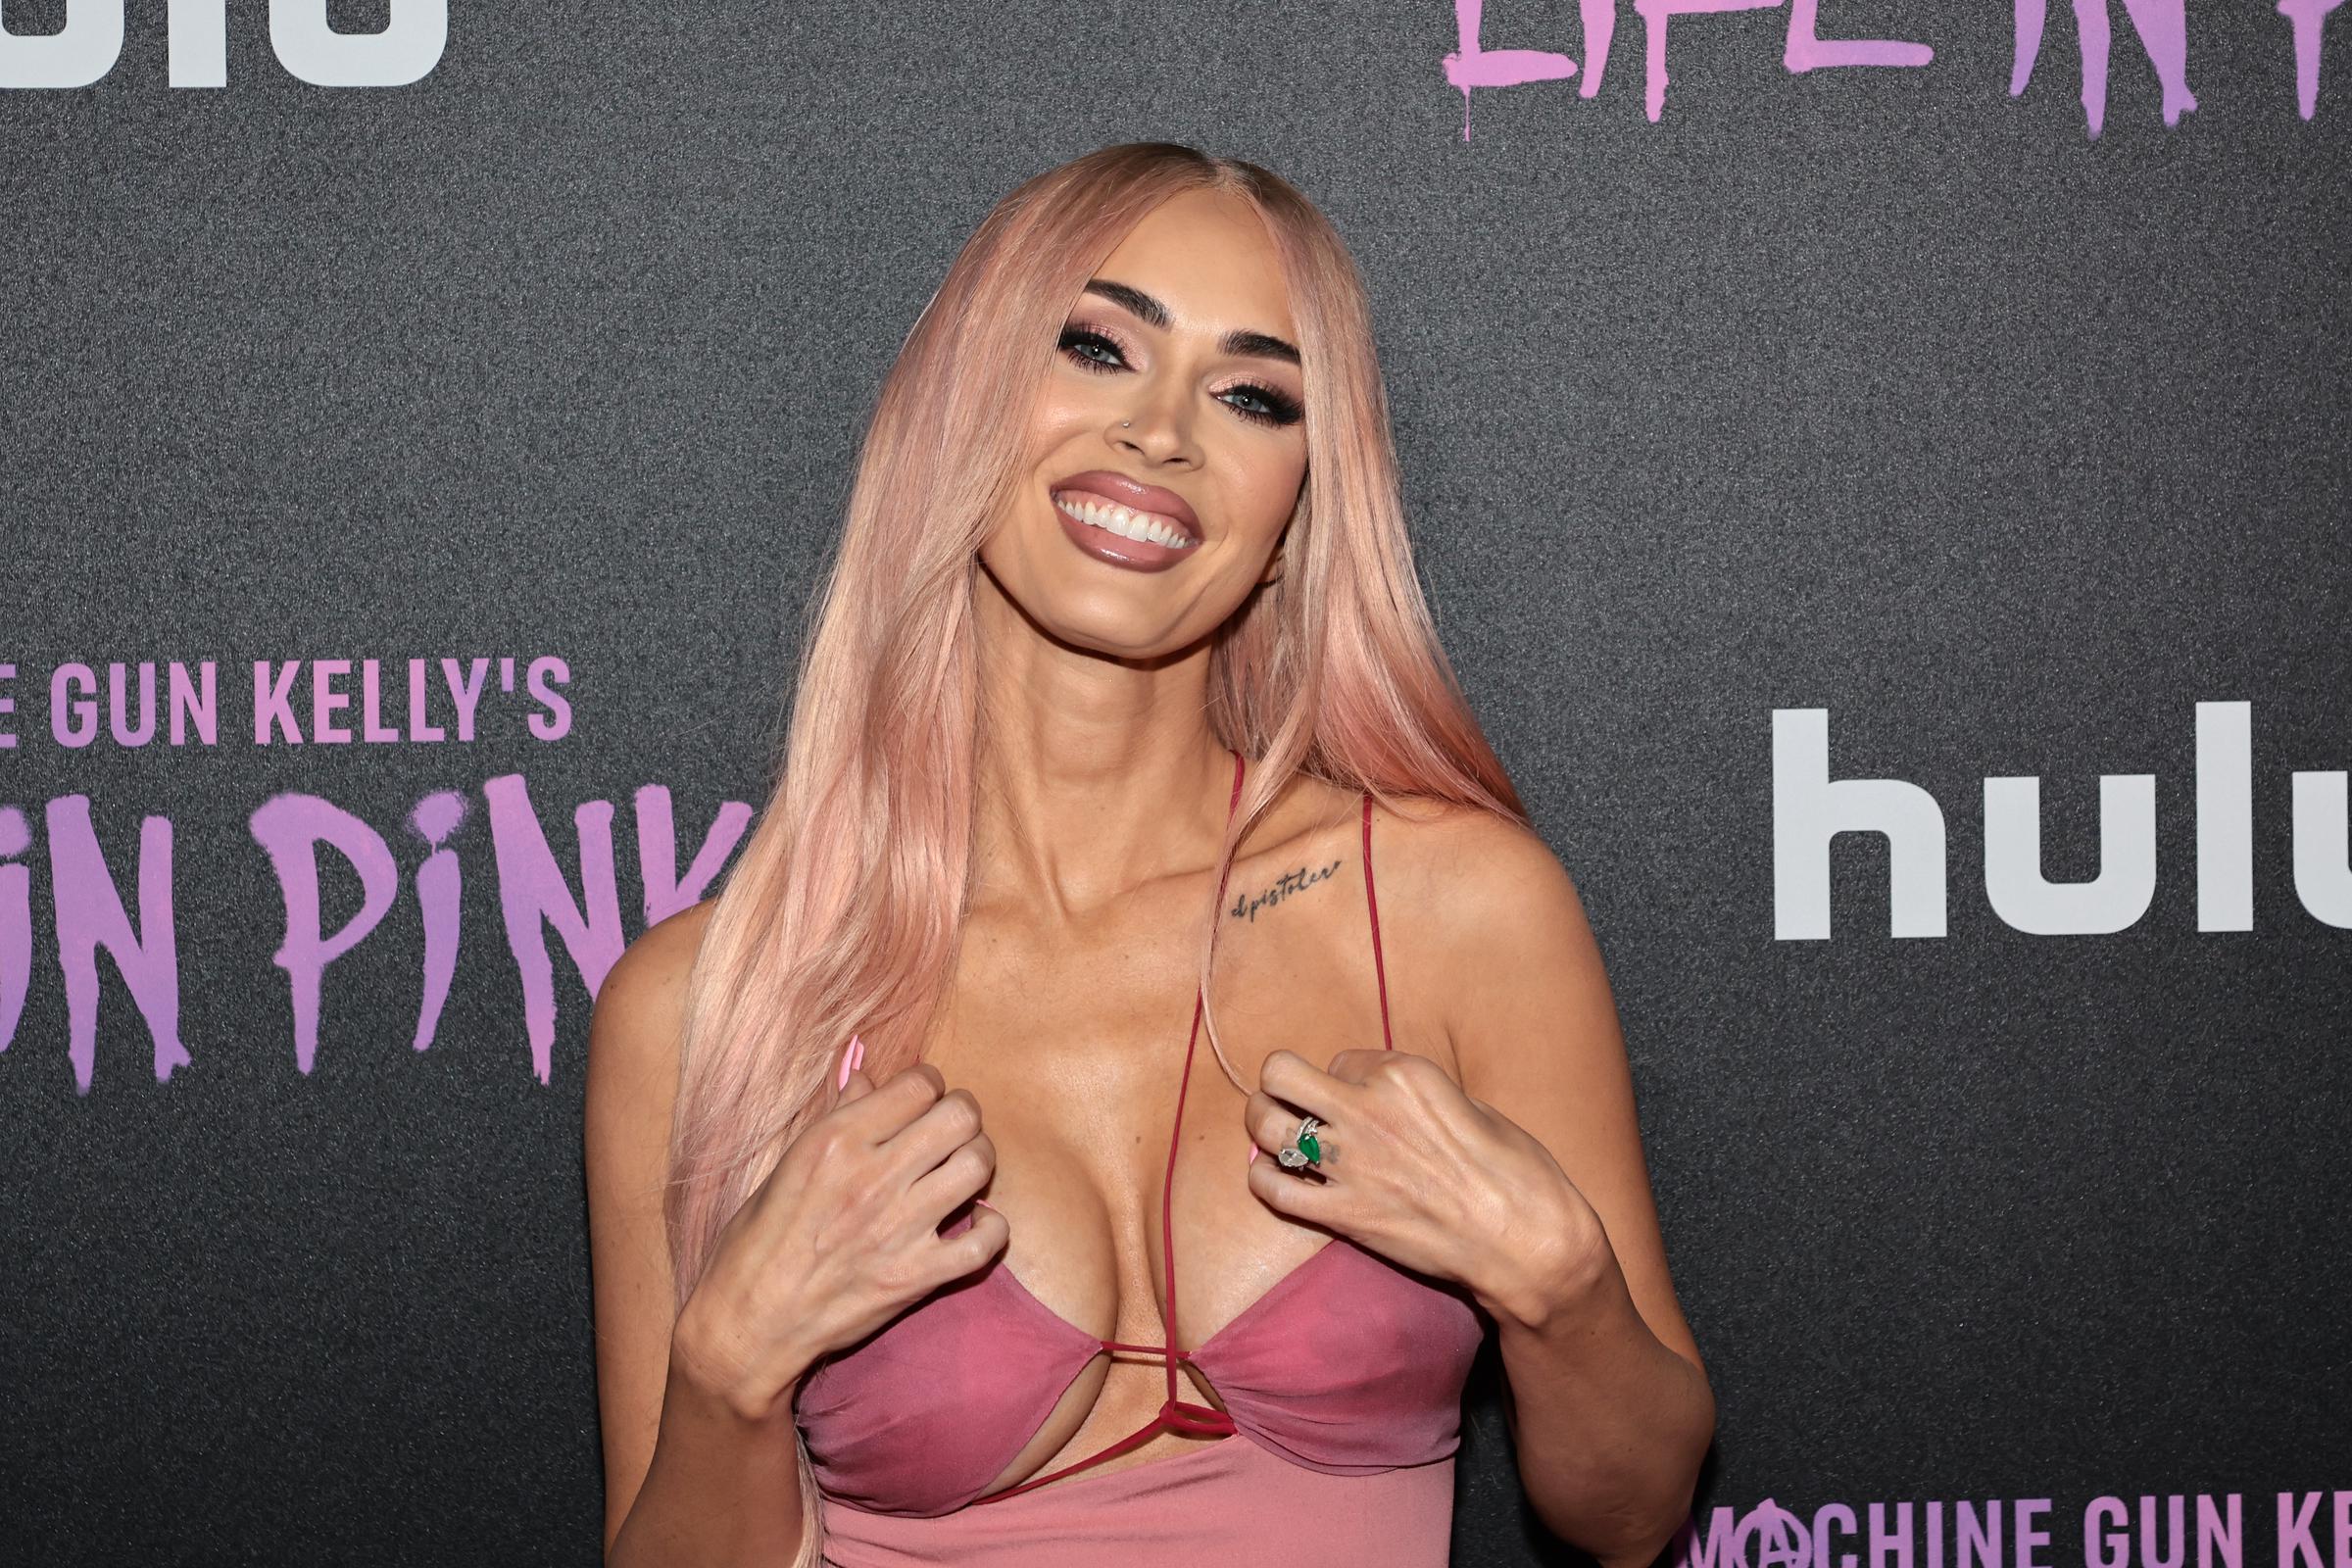 Megan Fox at the premiere of "Machine Gun Kelly's Life In Pink" on June 27, 2022, in New York City. | Source: Getty Images